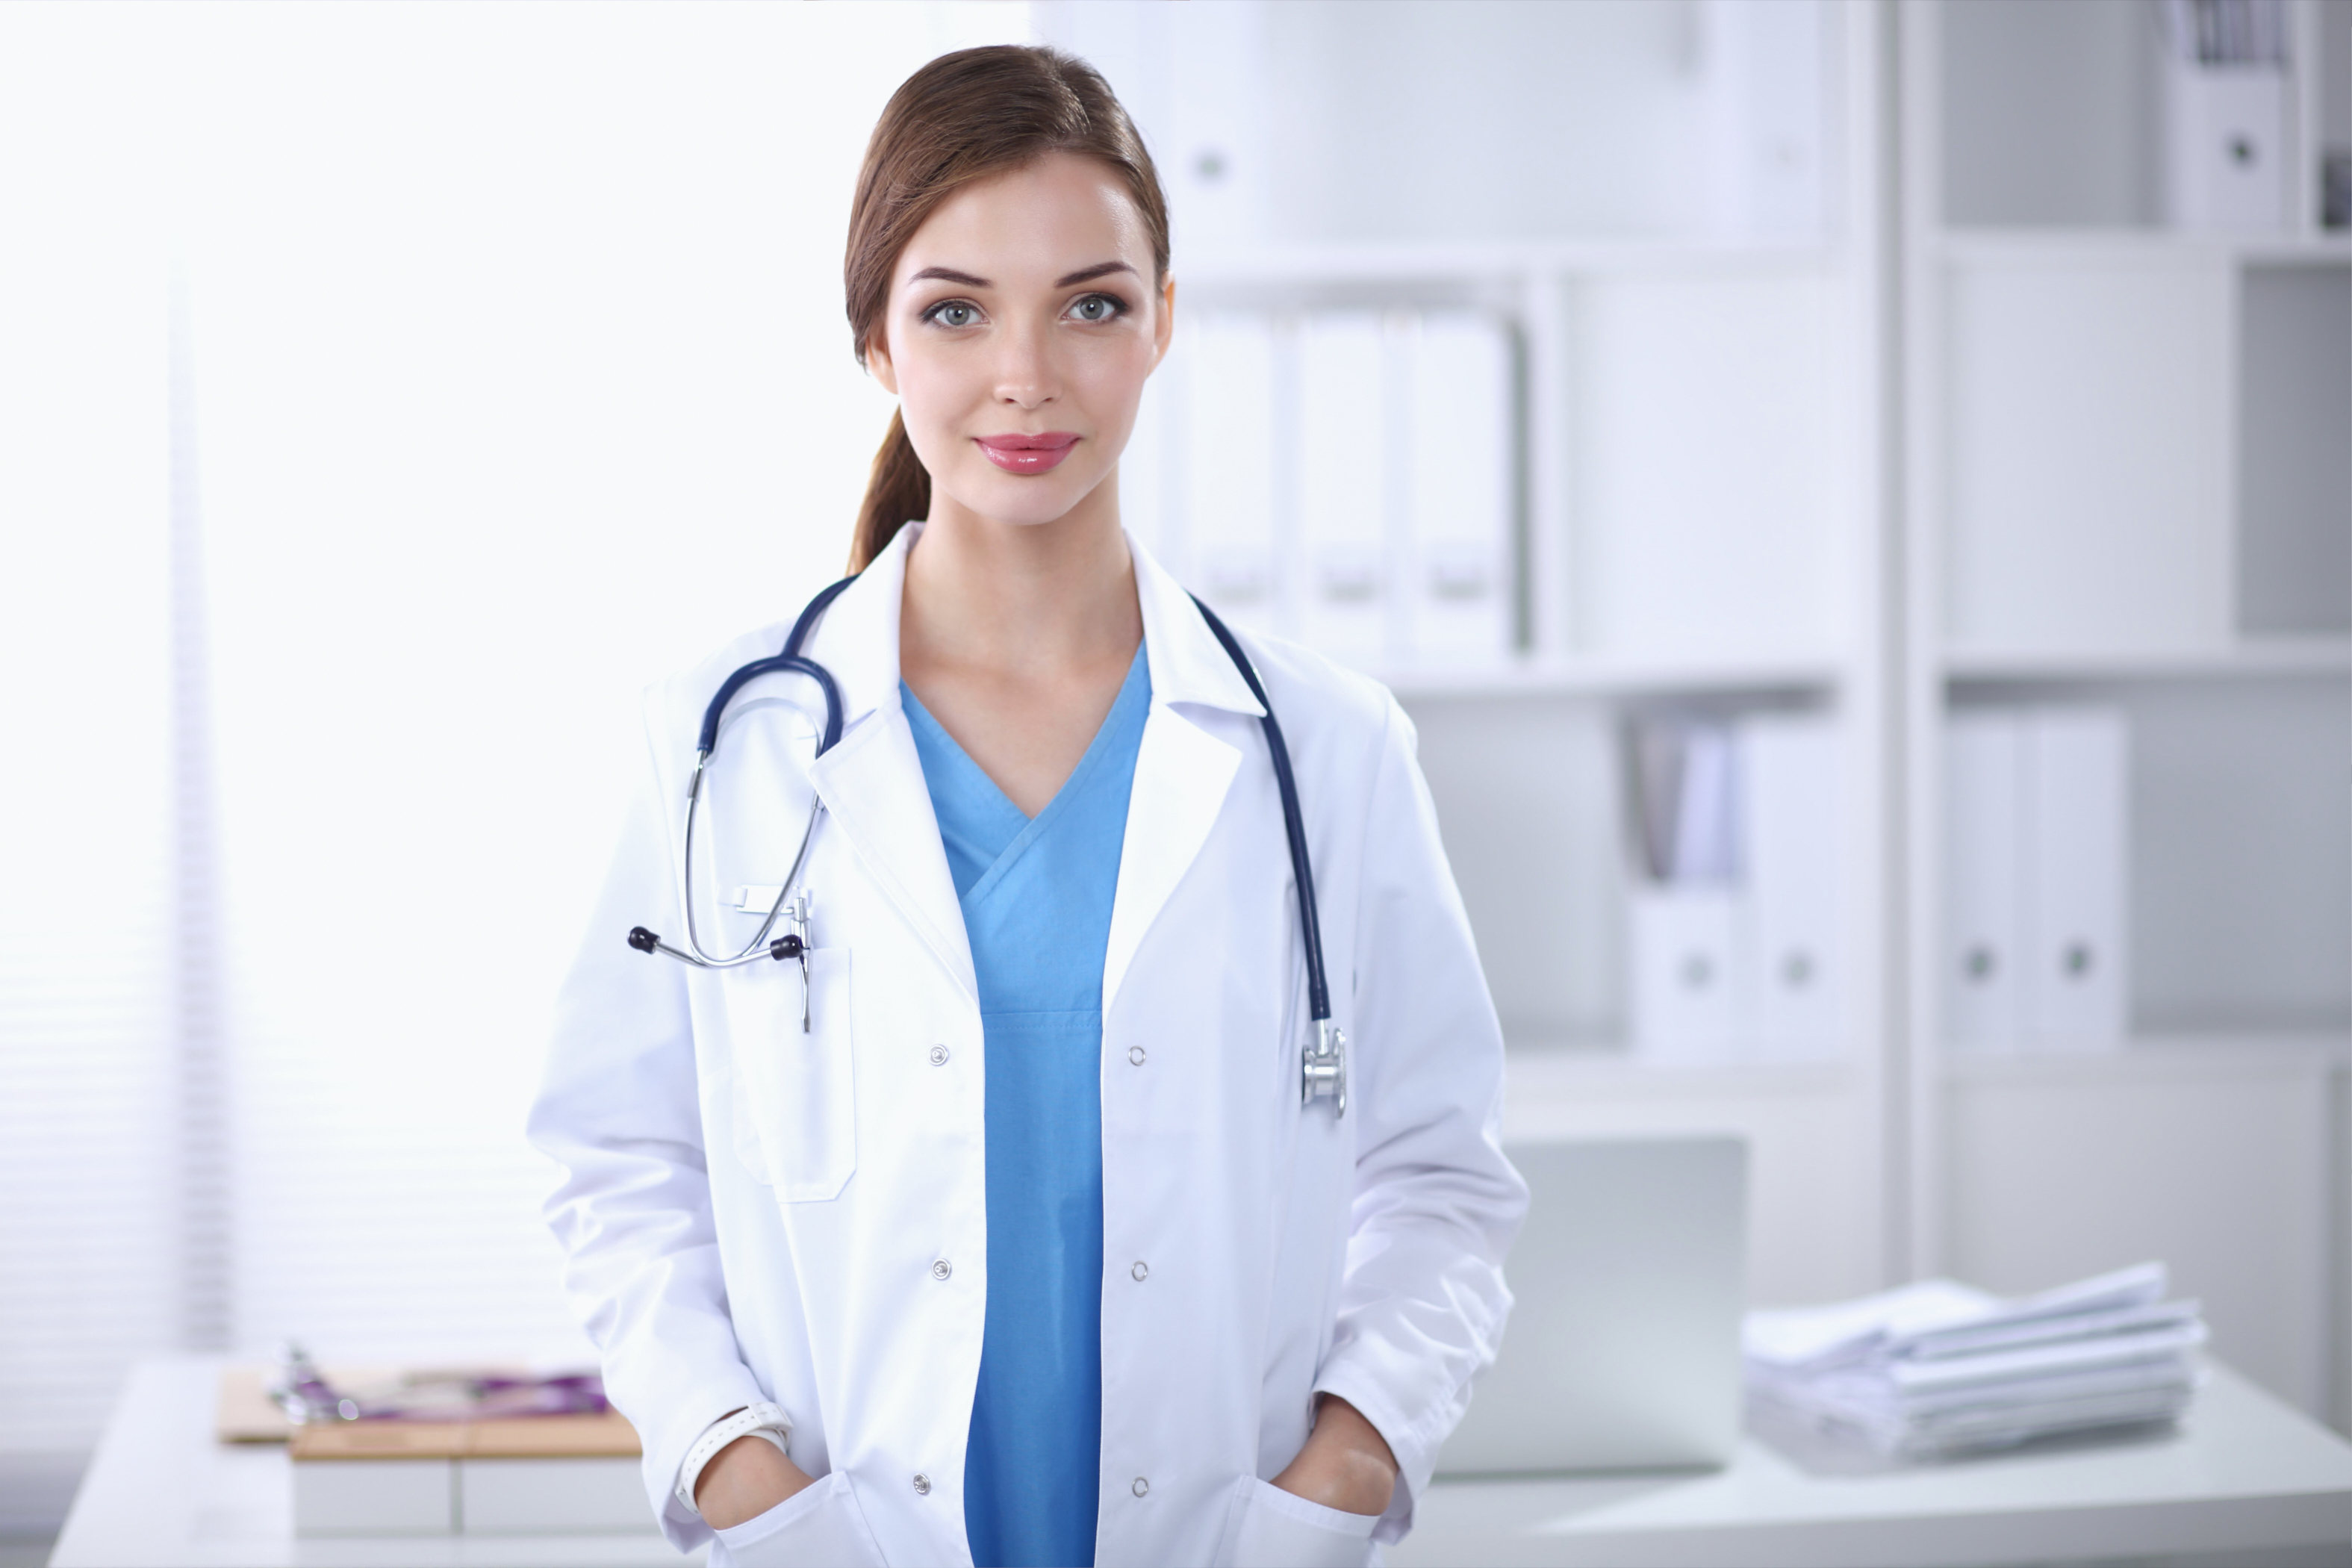 bigstock-portrait-of-young-woman-doctor